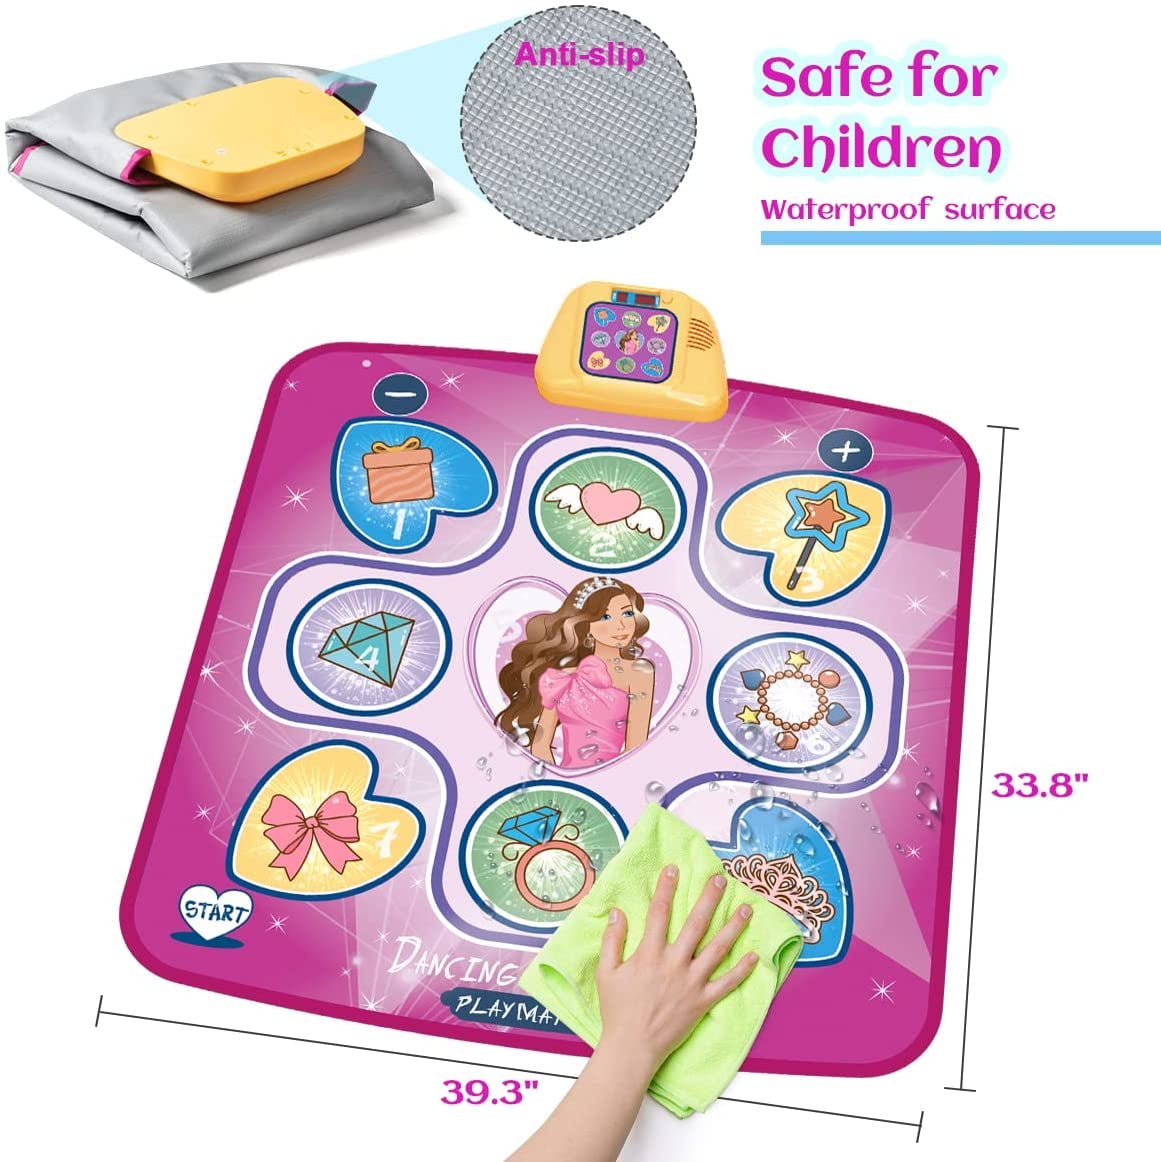 Dance Mat for Kids-5 Game Modes Dance Pad with LED Lights Music Dance Mats Toys for 3 4 5 6 7 8 9+ Year Old Girls and Boys 34.64'' X 39.37'' Christmas Birthday Gifts for 3-12 Year Old Girls Boys 